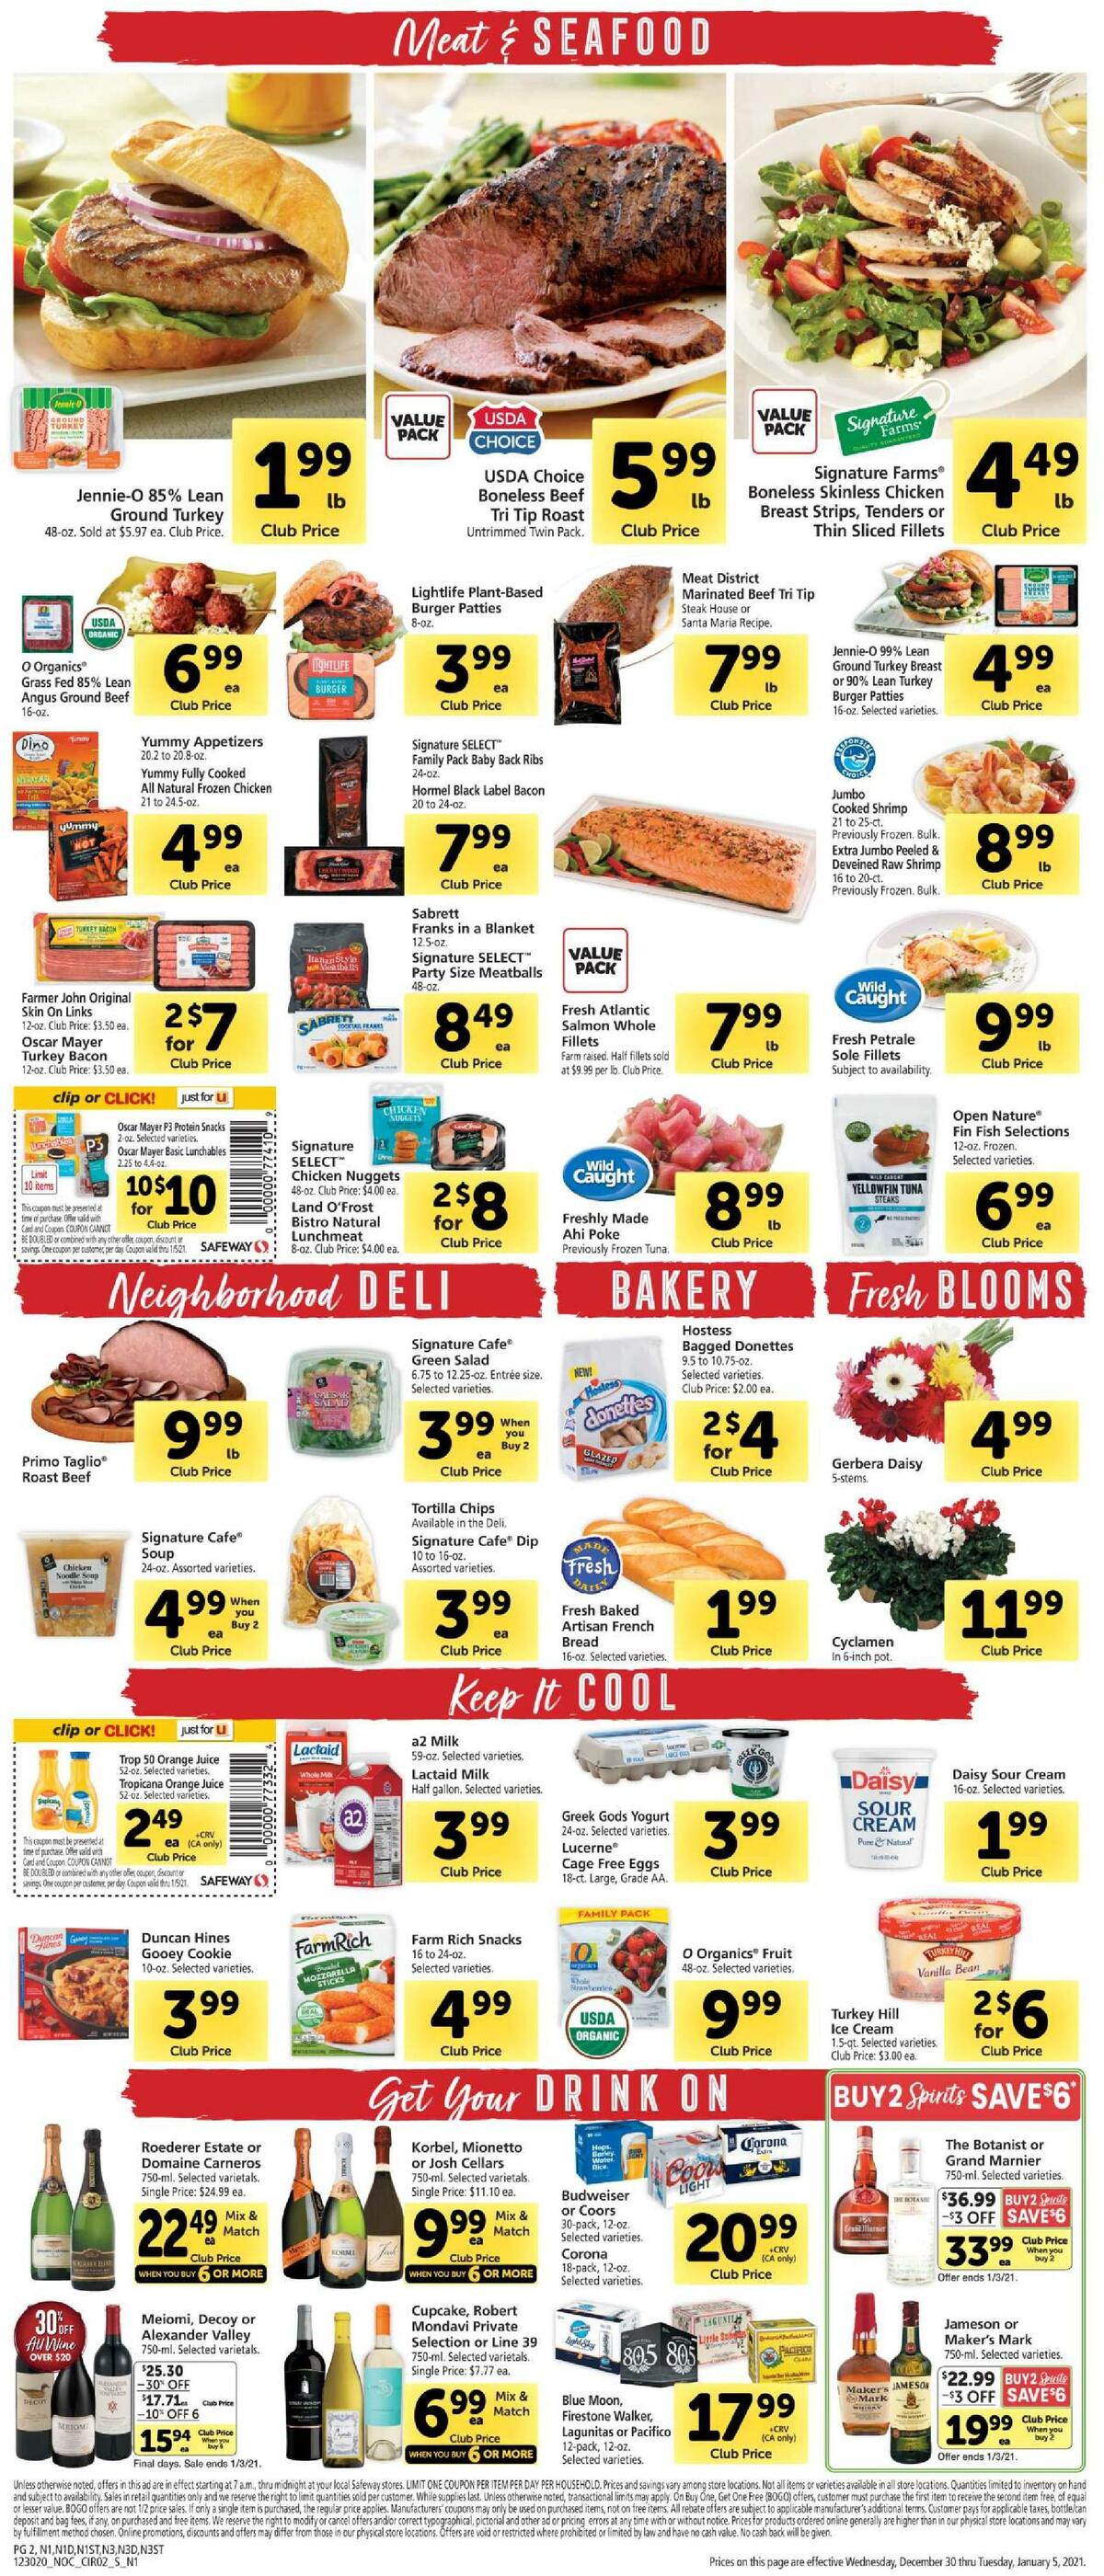 Safeway Weekly Ad from December 30